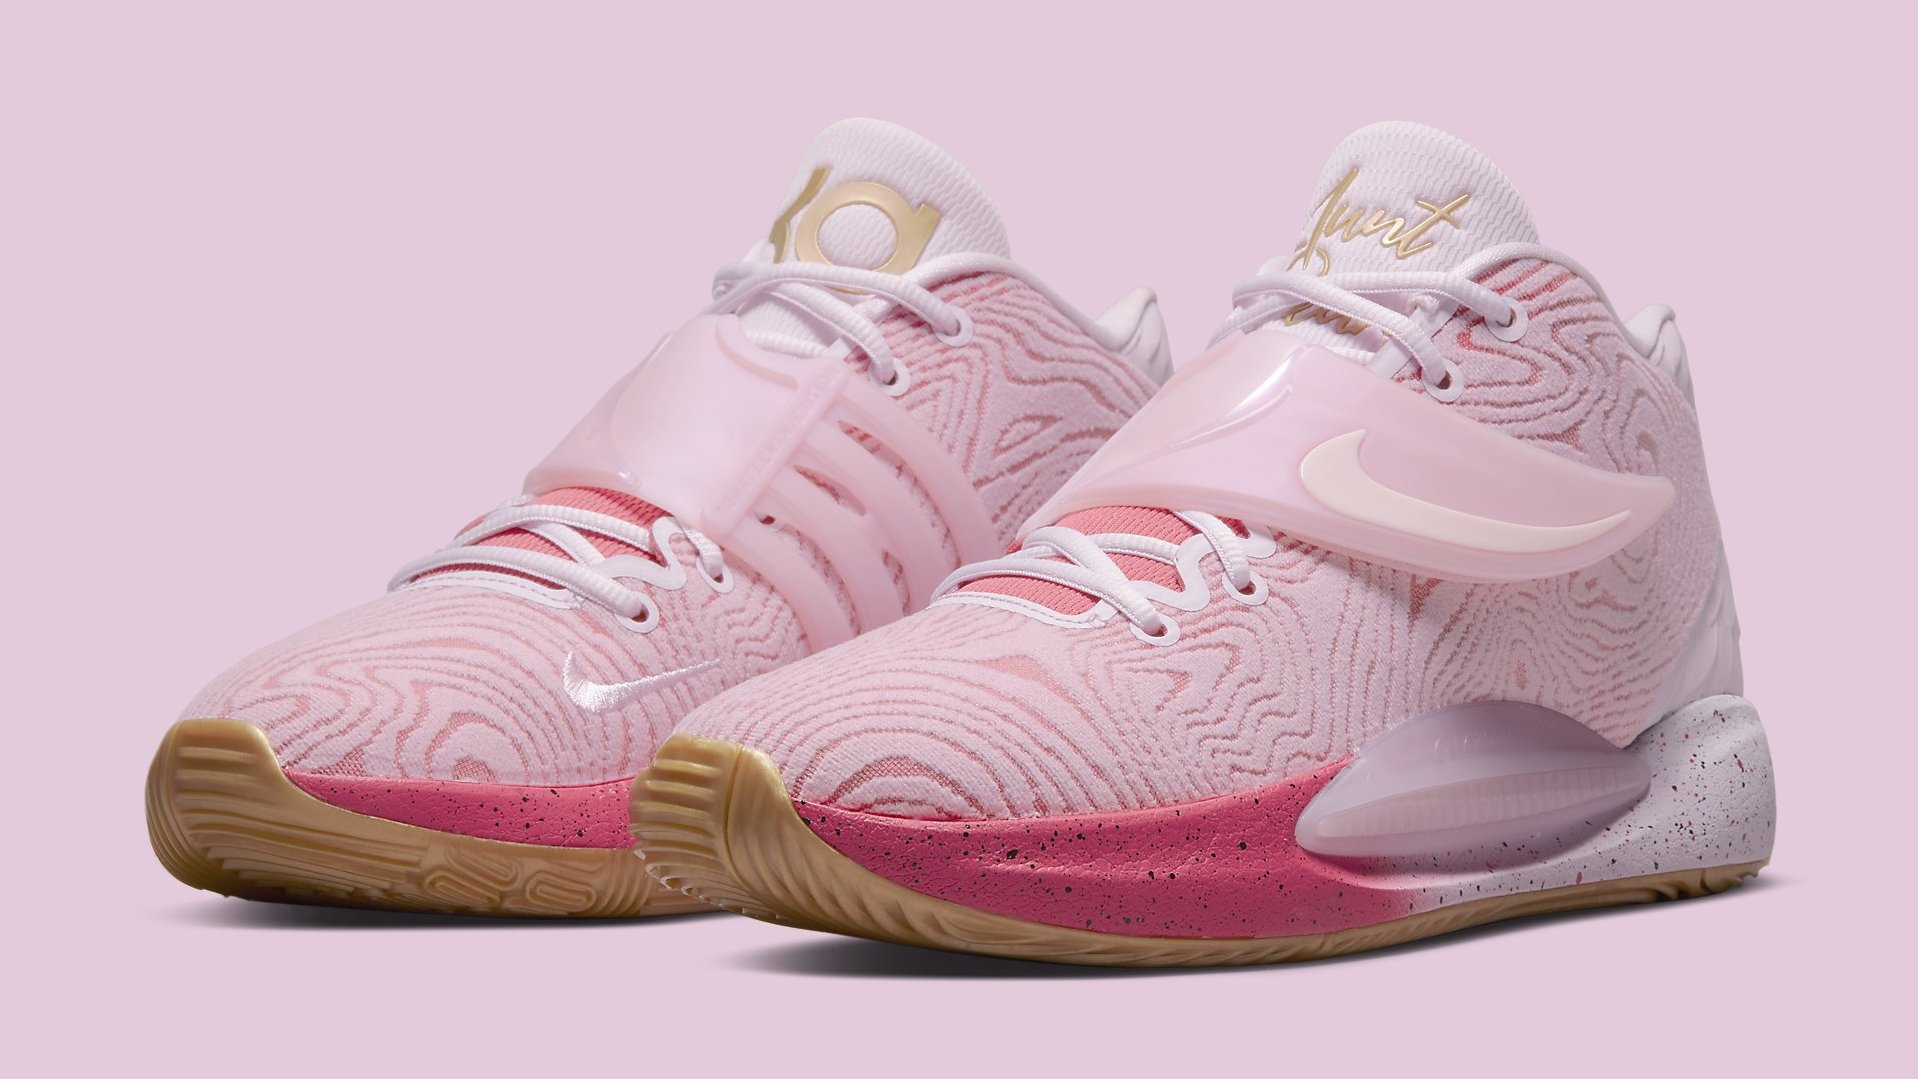 Opwekking Verdragen element Detailed Look at the 'Aunt Pearl' Nike KD 14 | Complex